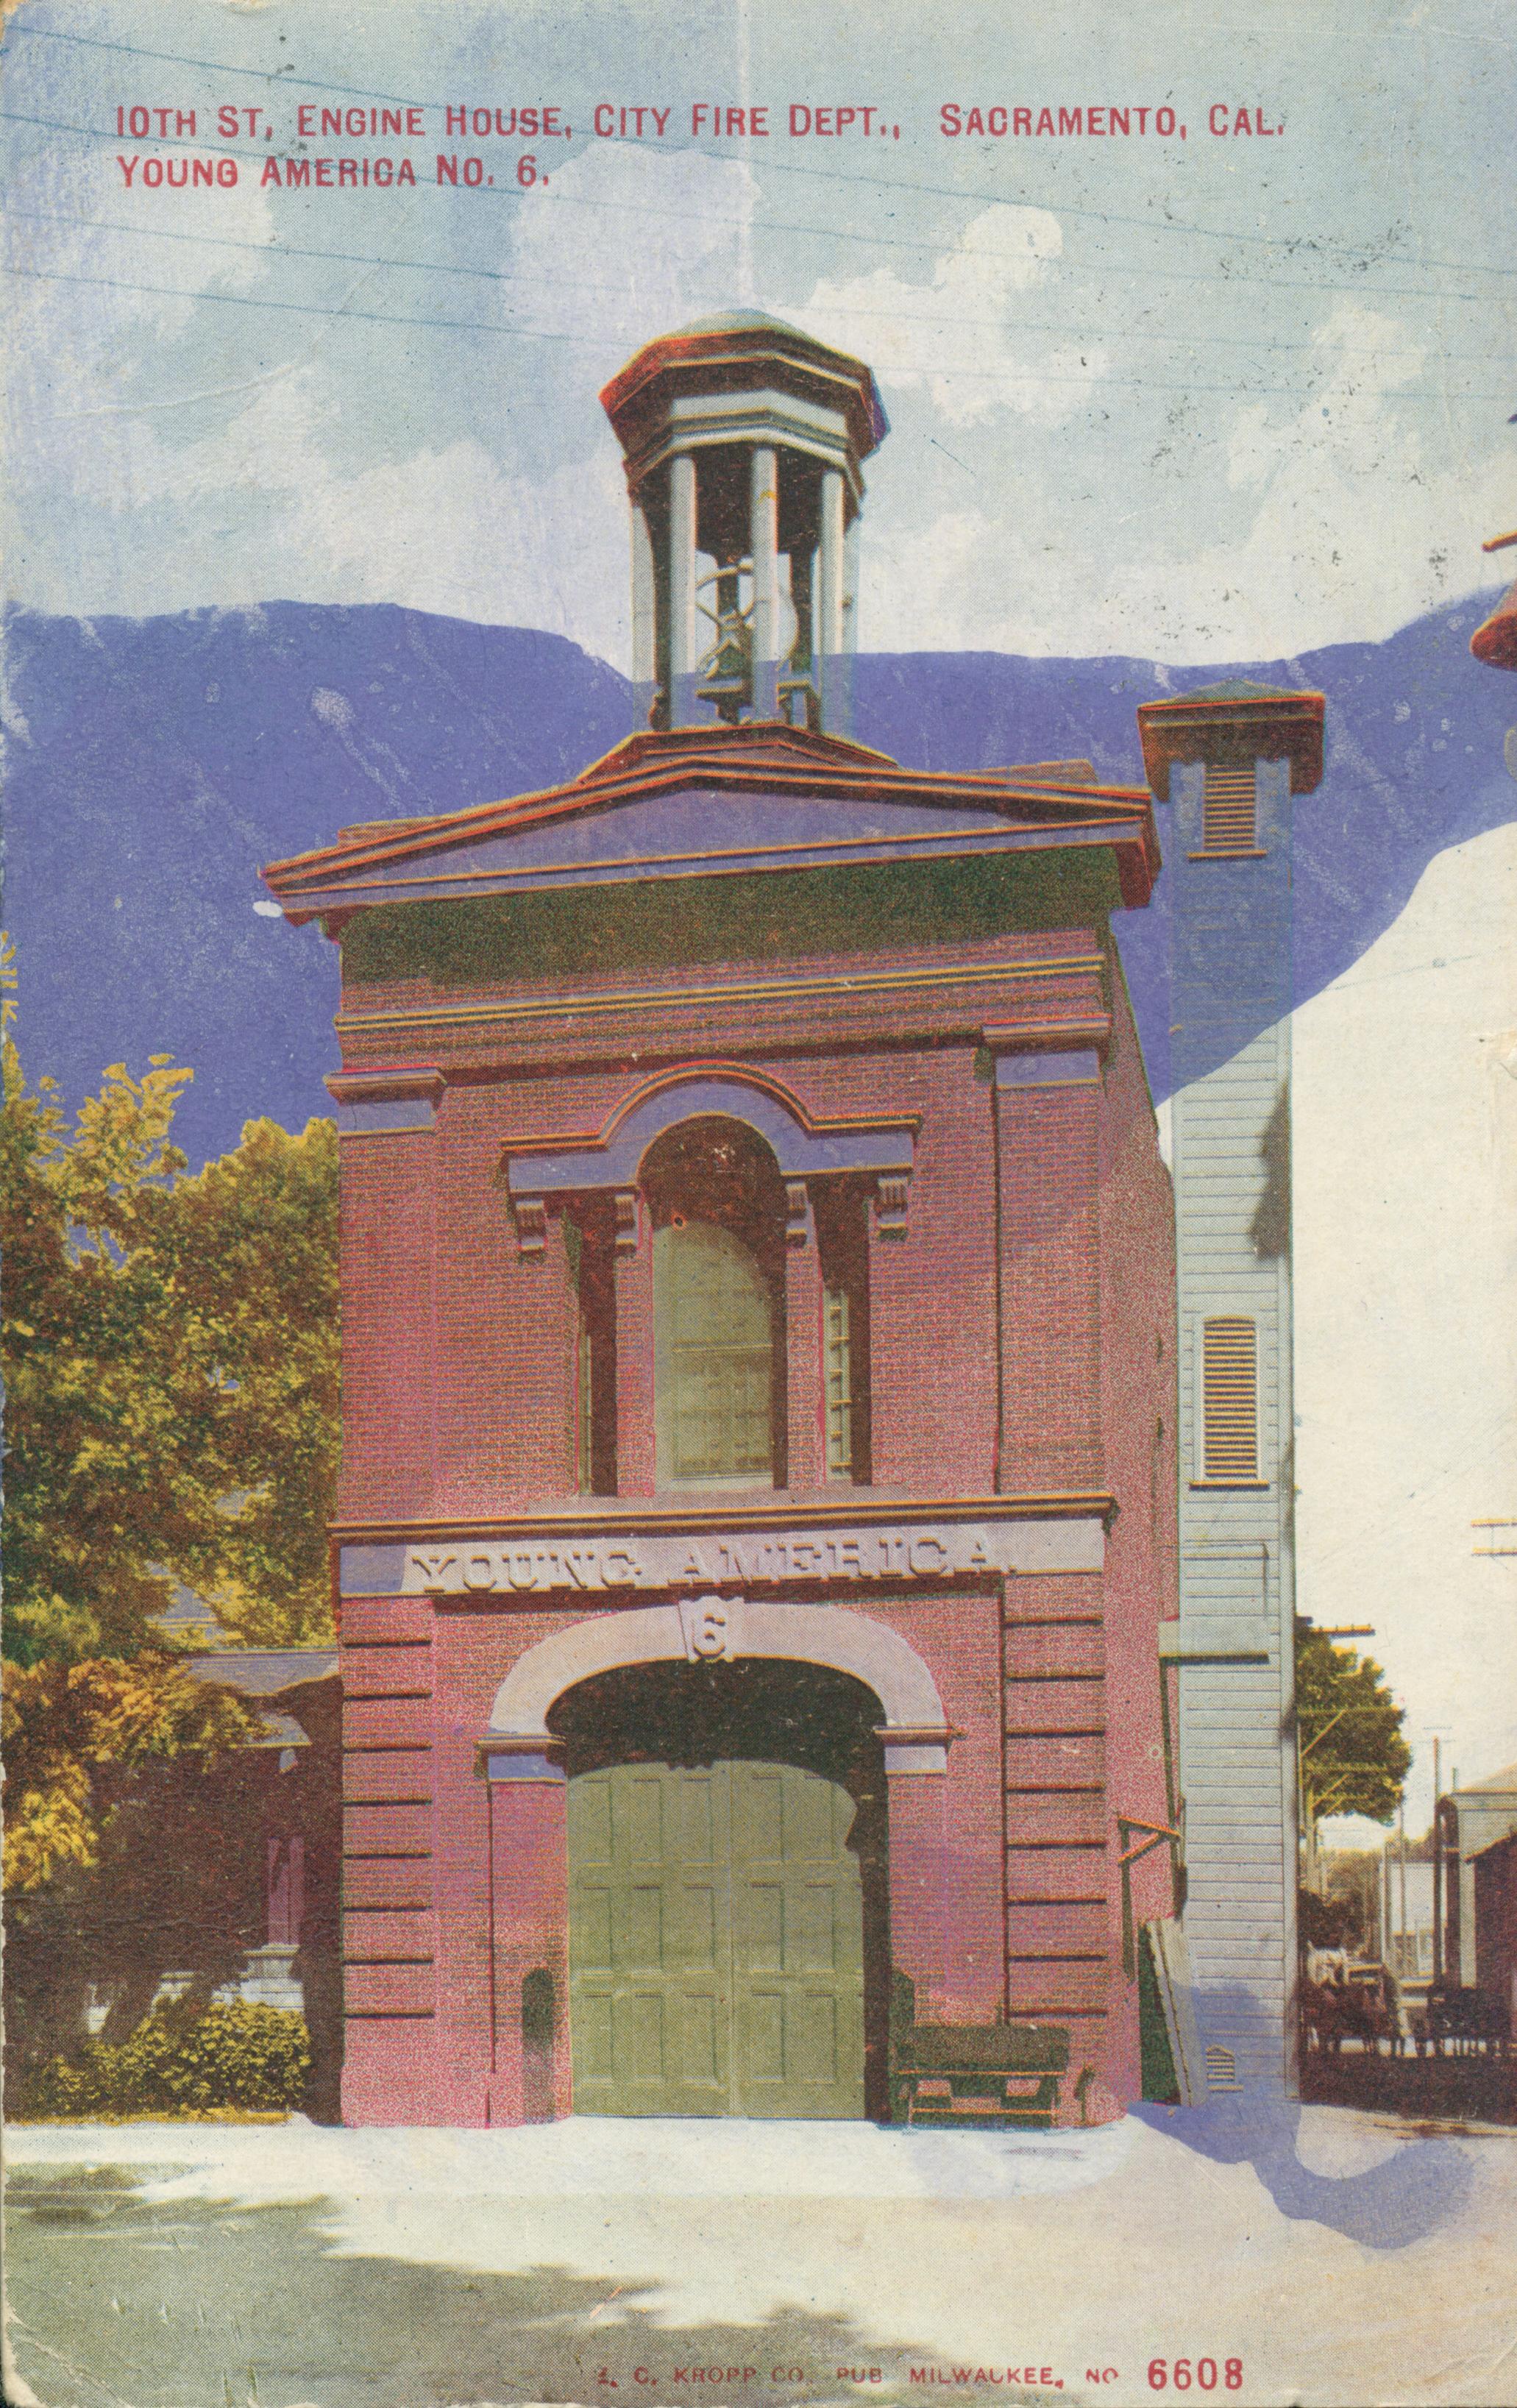 This postcard shows the exterior of the 10th Street fire station in Sacramento.